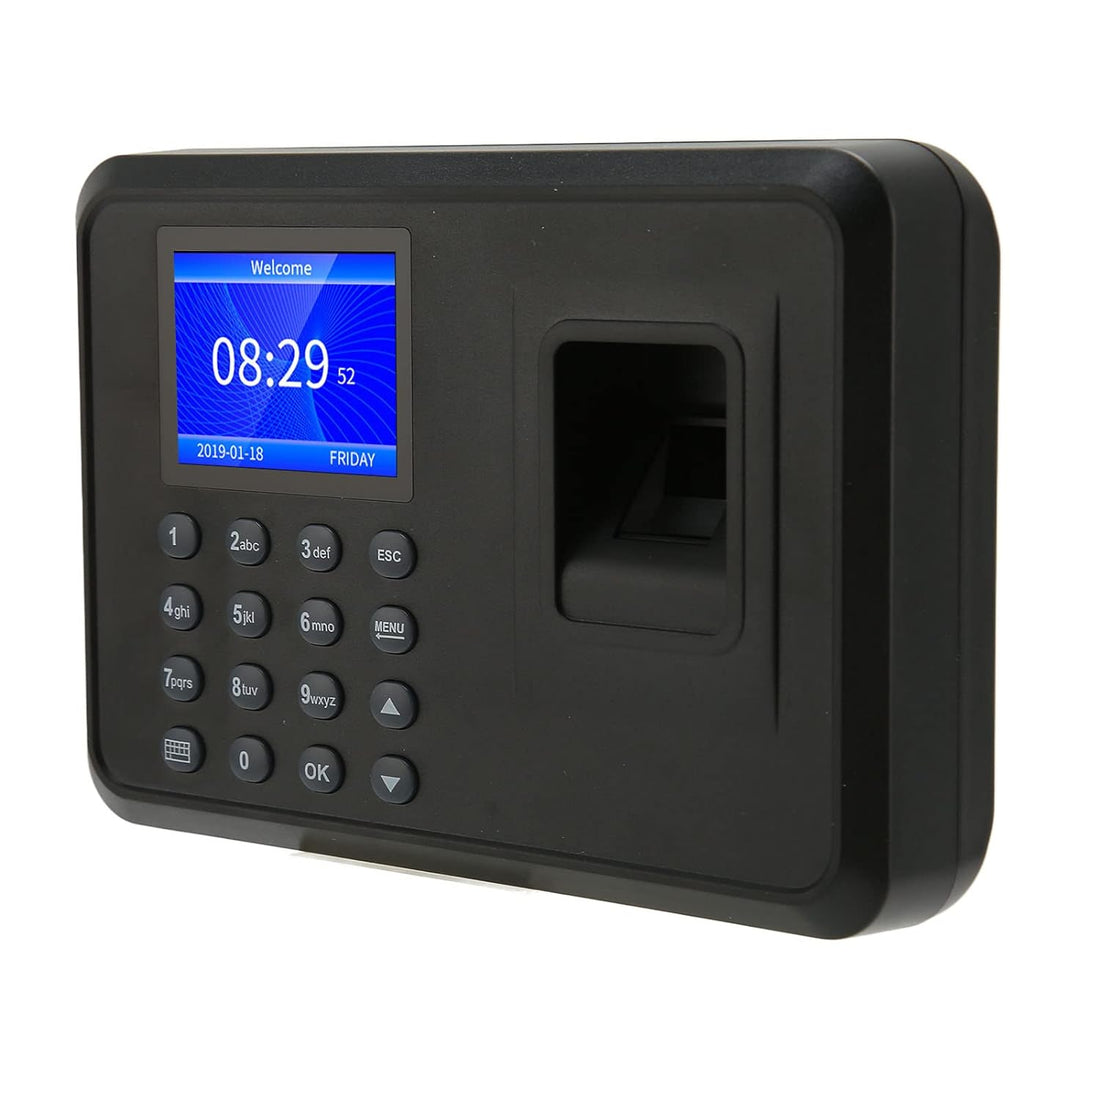 Luqeeg Time Clock, Fingerprint Assistance Machine with Free Software 2.4 Inch Name Biometric Fingerprint Machine for Business and Offices